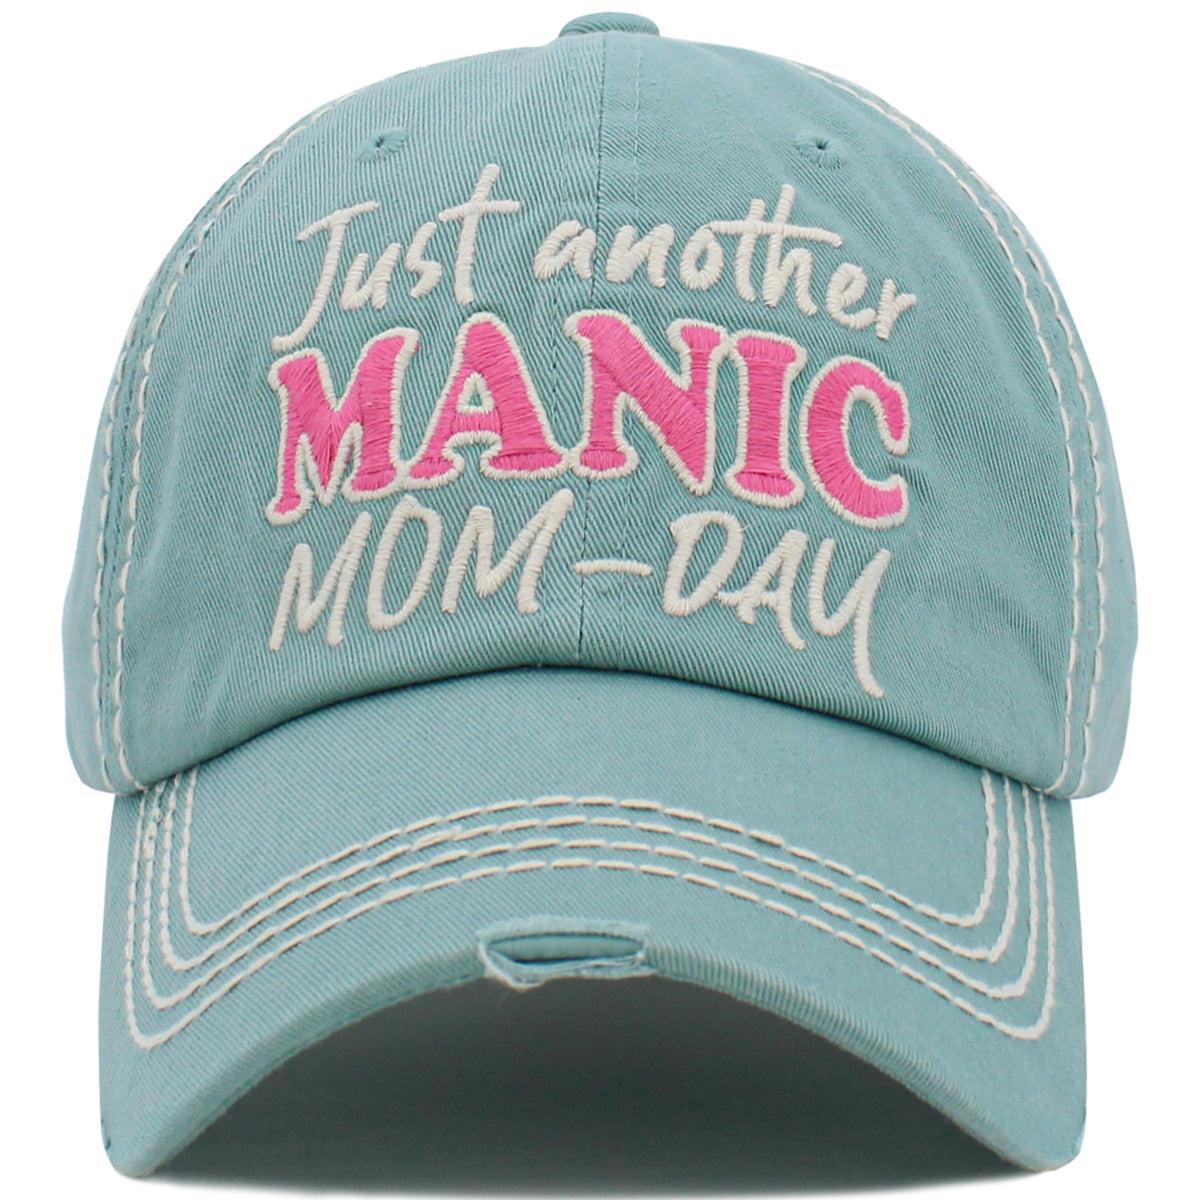 1472 - Just Another Manic Mom Day Hat